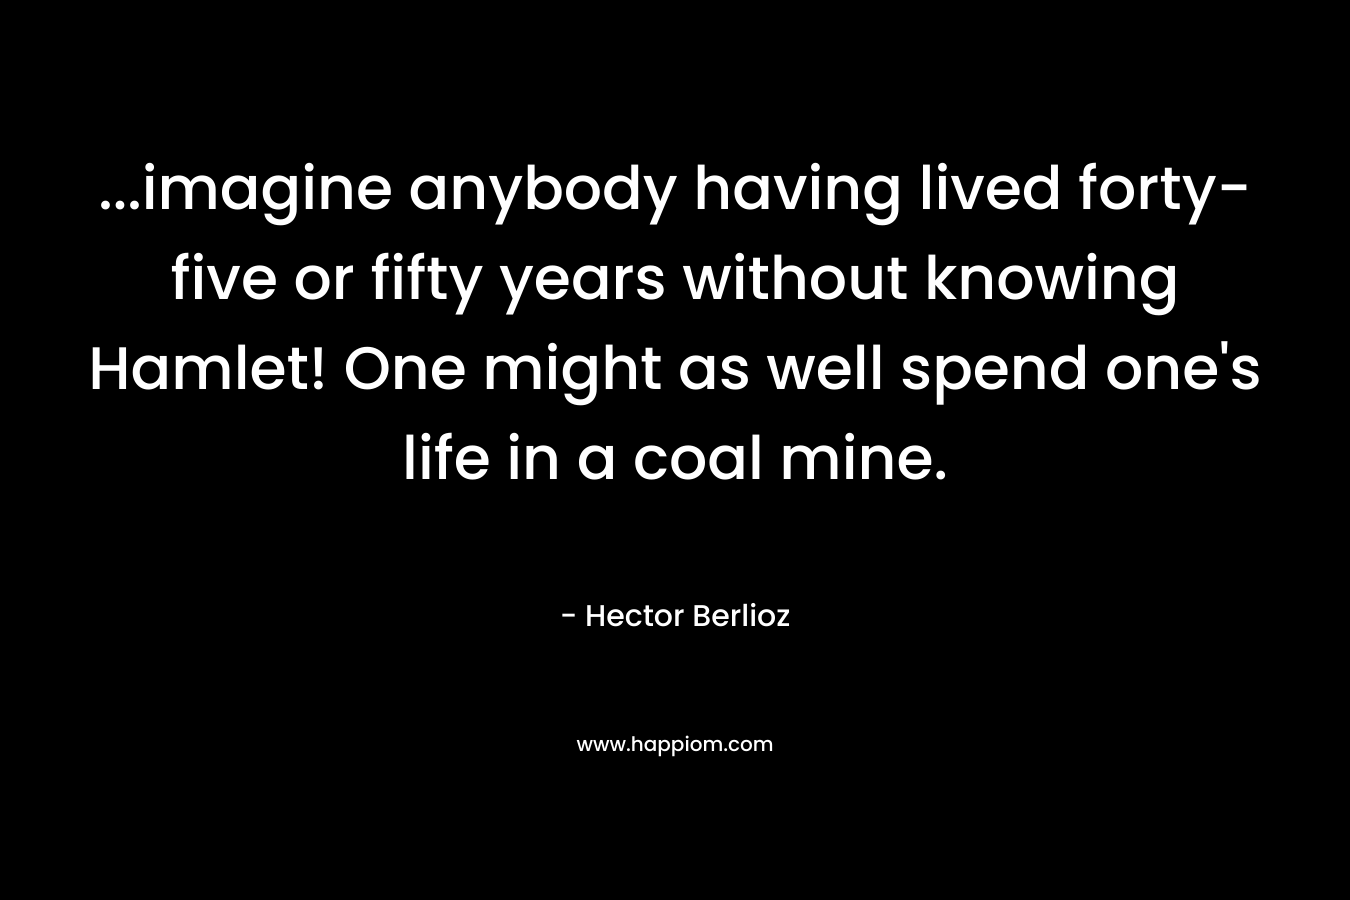 …imagine anybody having lived forty-five or fifty years without knowing Hamlet! One might as well spend one’s life in a coal mine. – Hector Berlioz